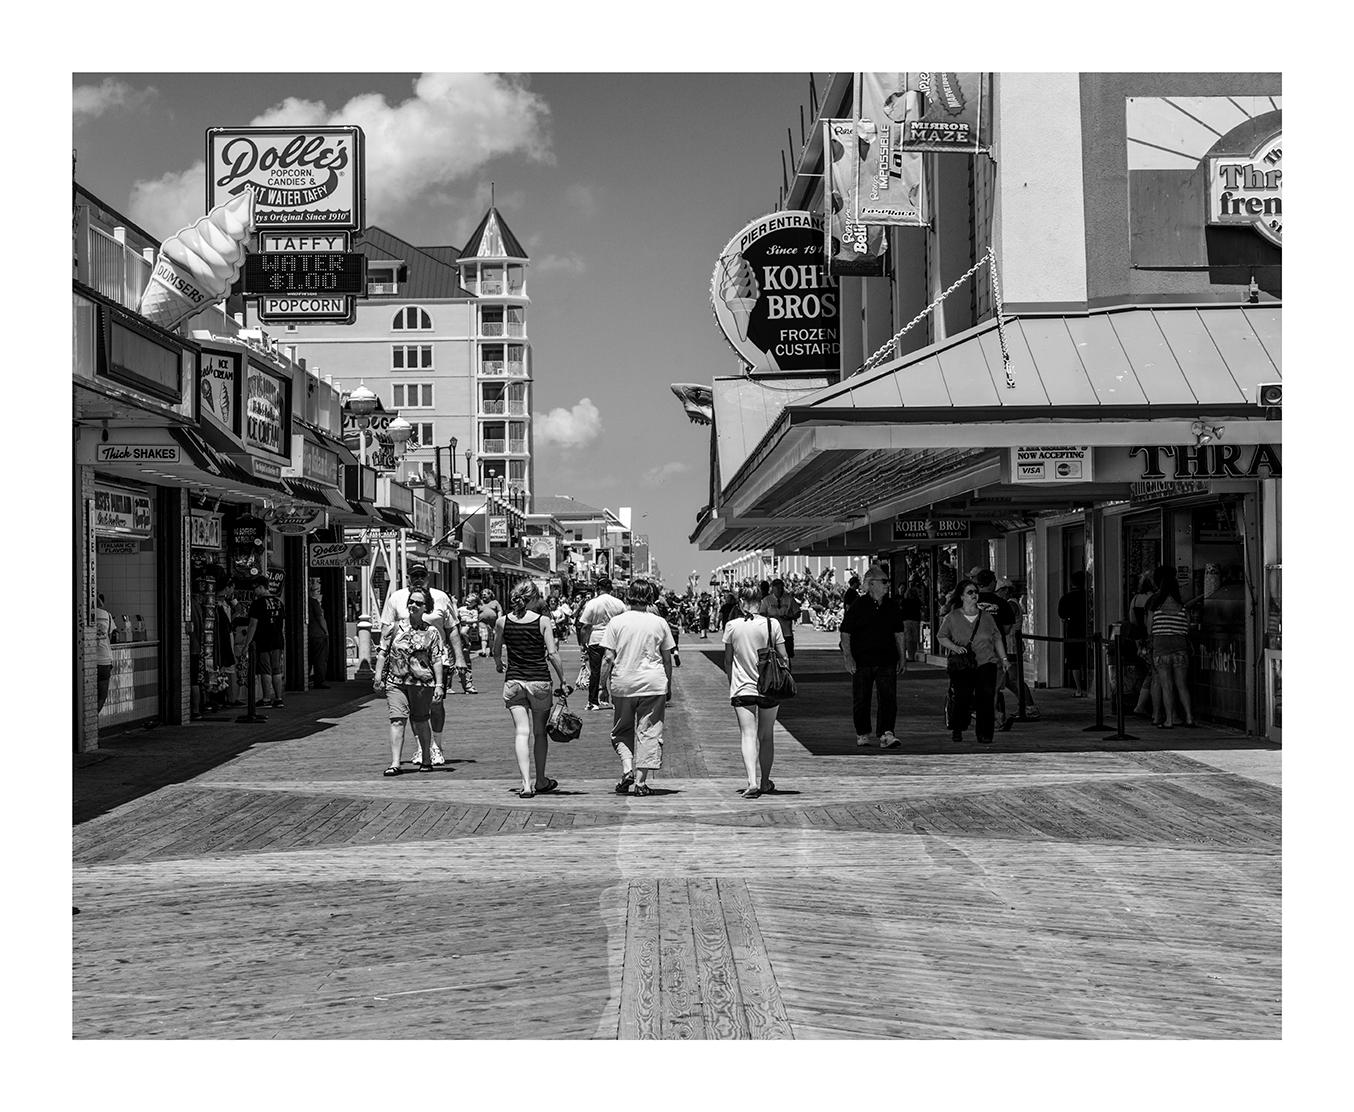 "Strolling' the Boards". Ocean City, Maryland